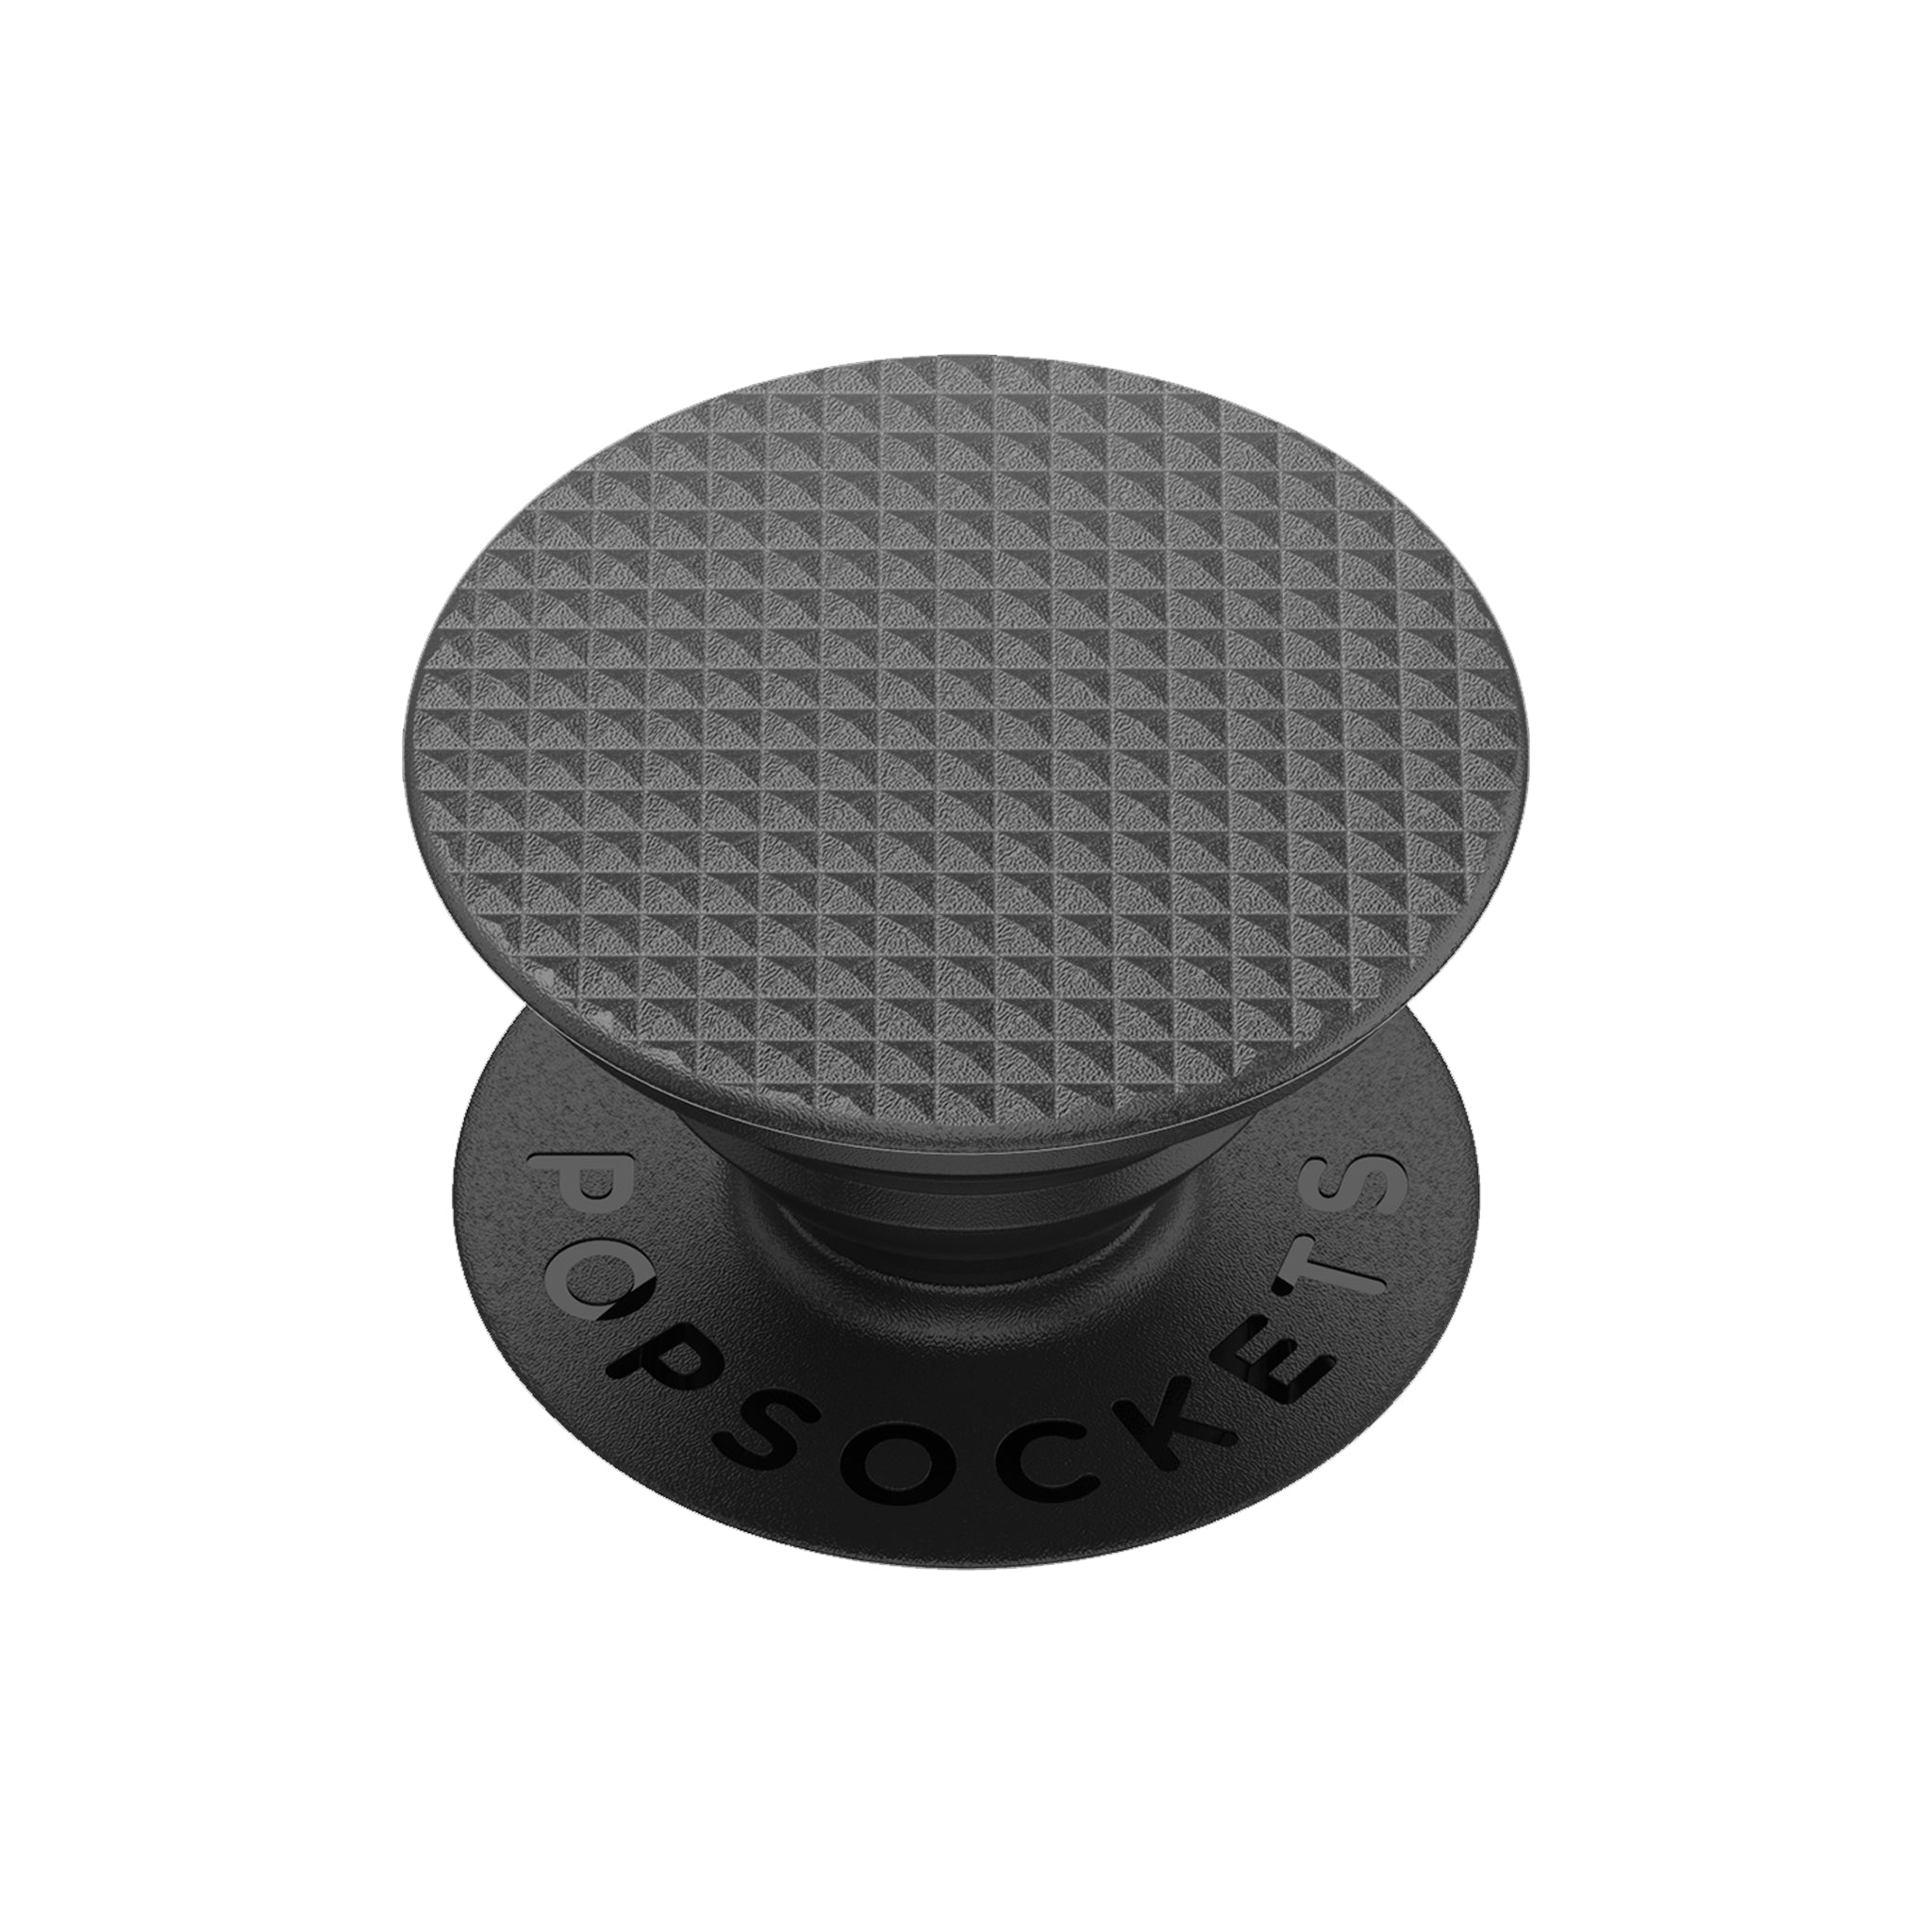 Popsockets - Popgrip Swappable Abstract Device Stand And Grip - Knurled Texture Black